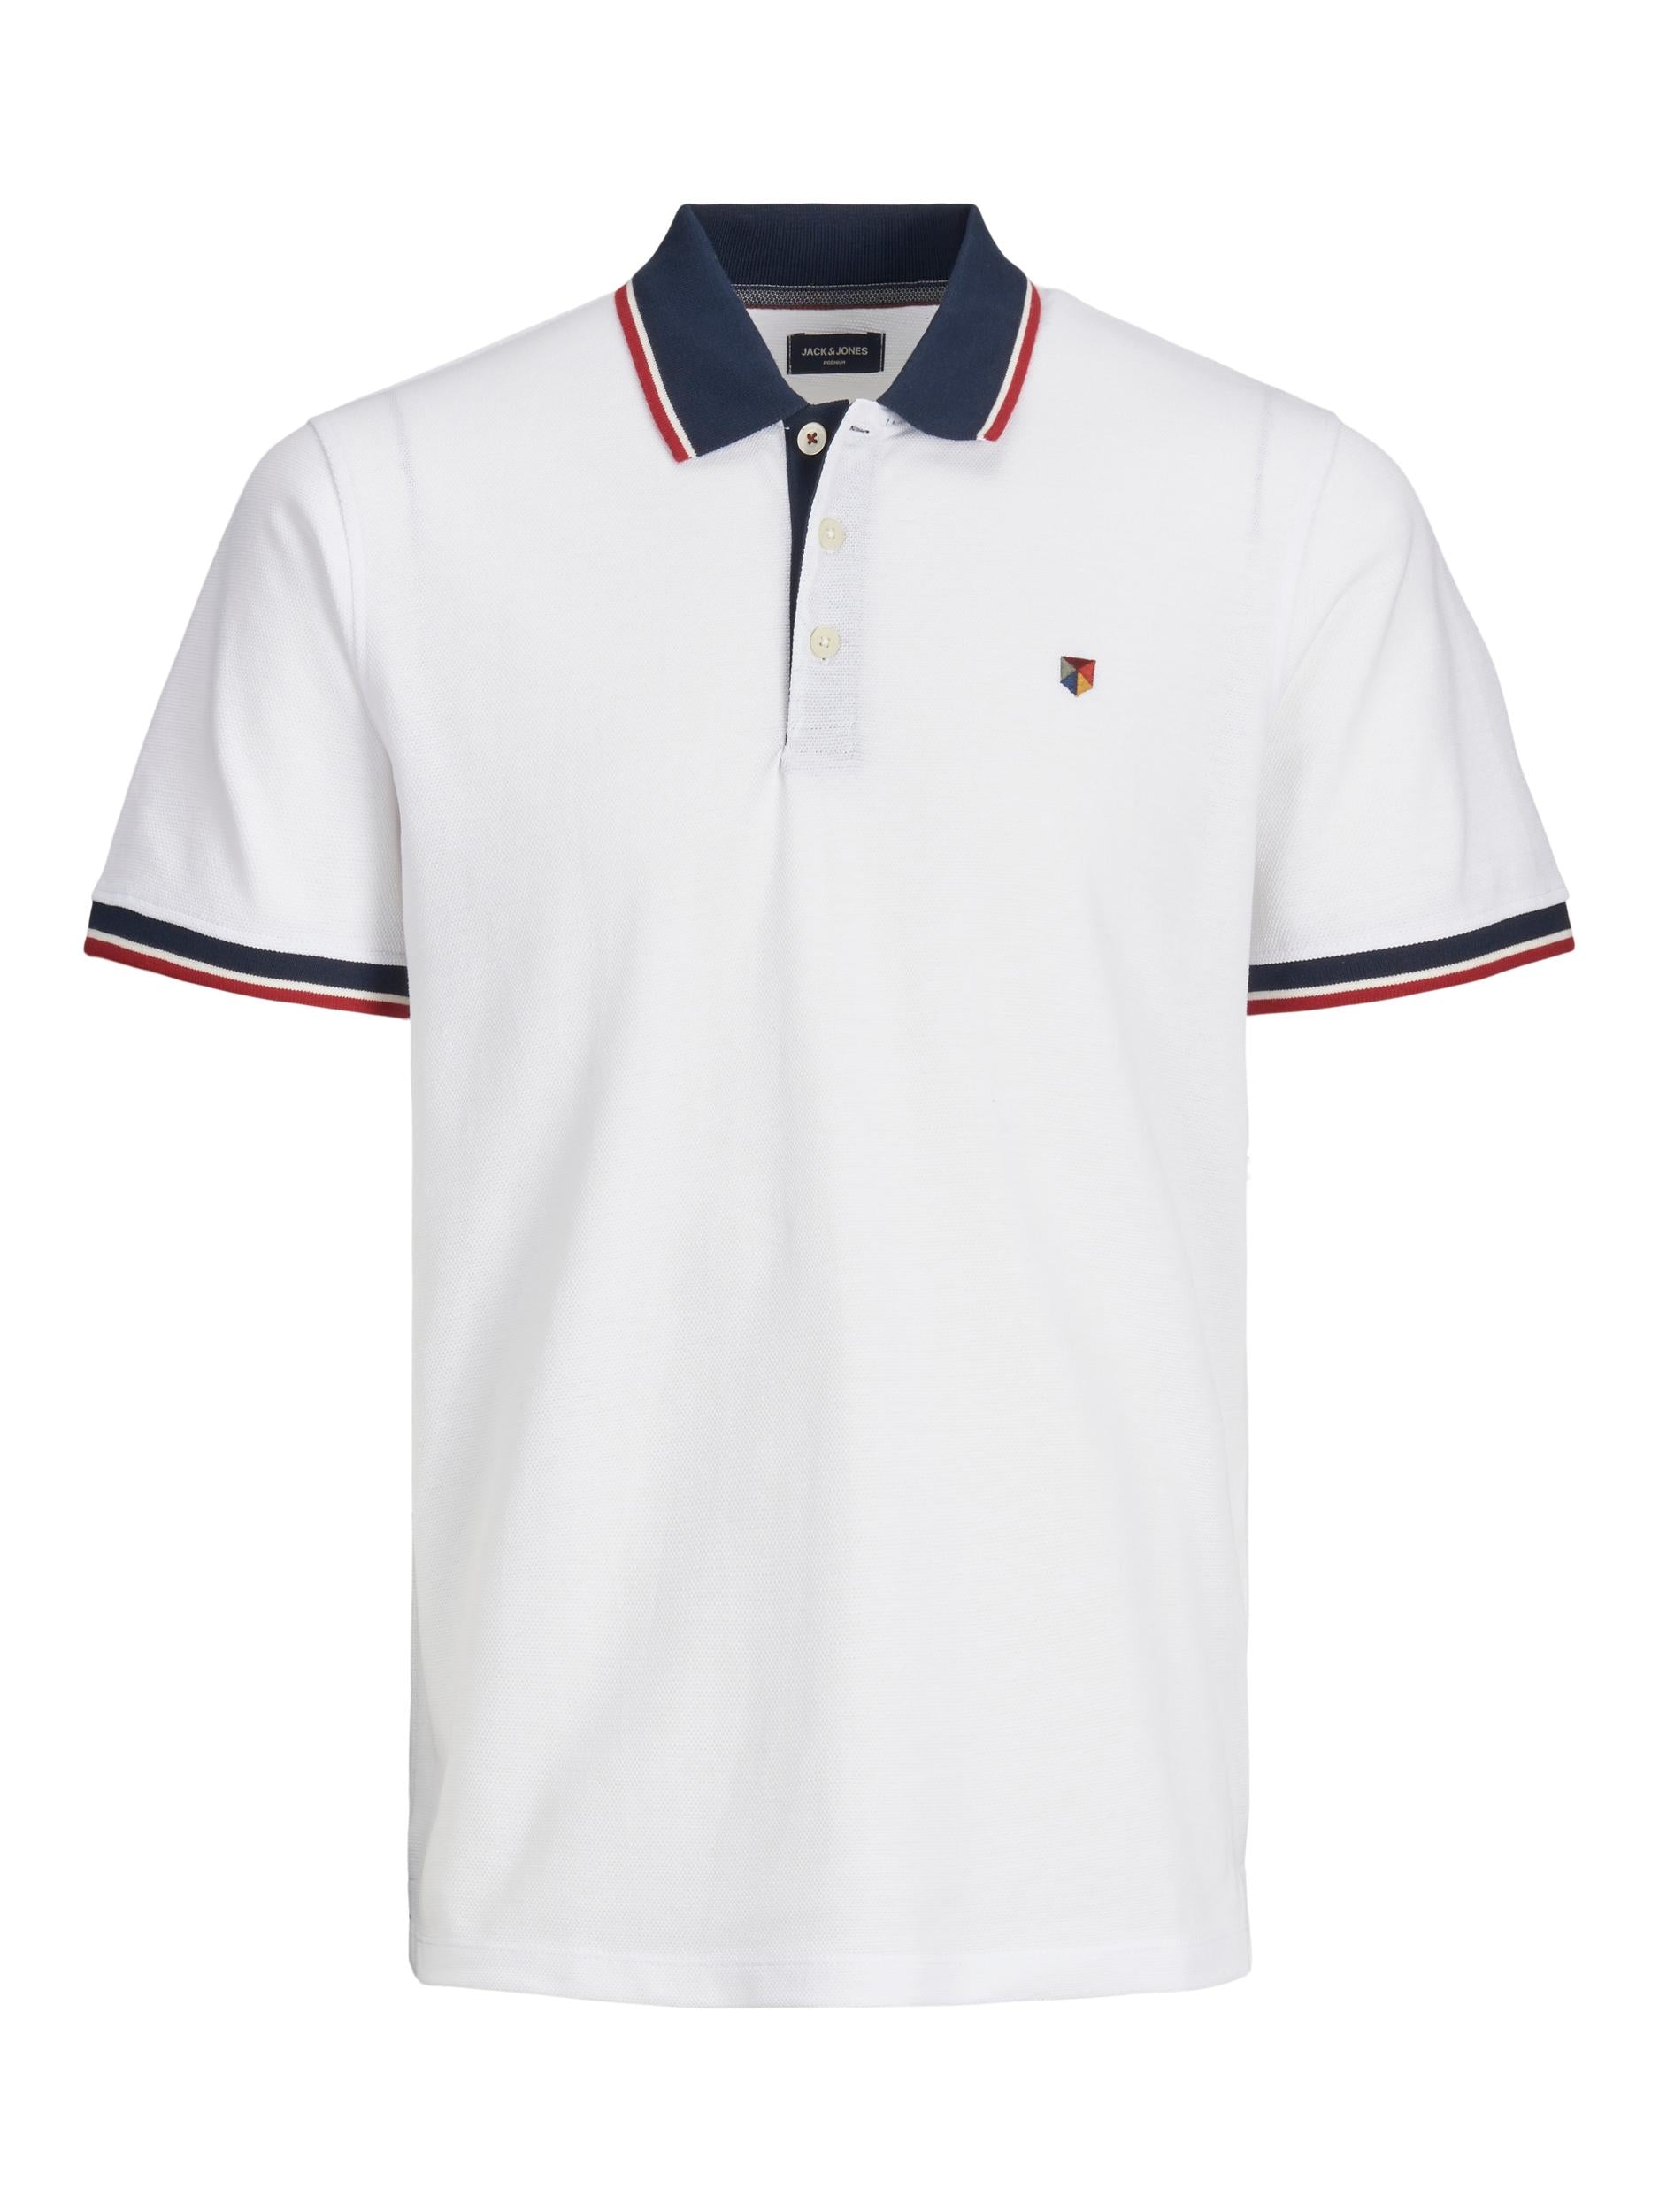 Bluwin Short Sleeve Cloud Dancer Polo-Front view